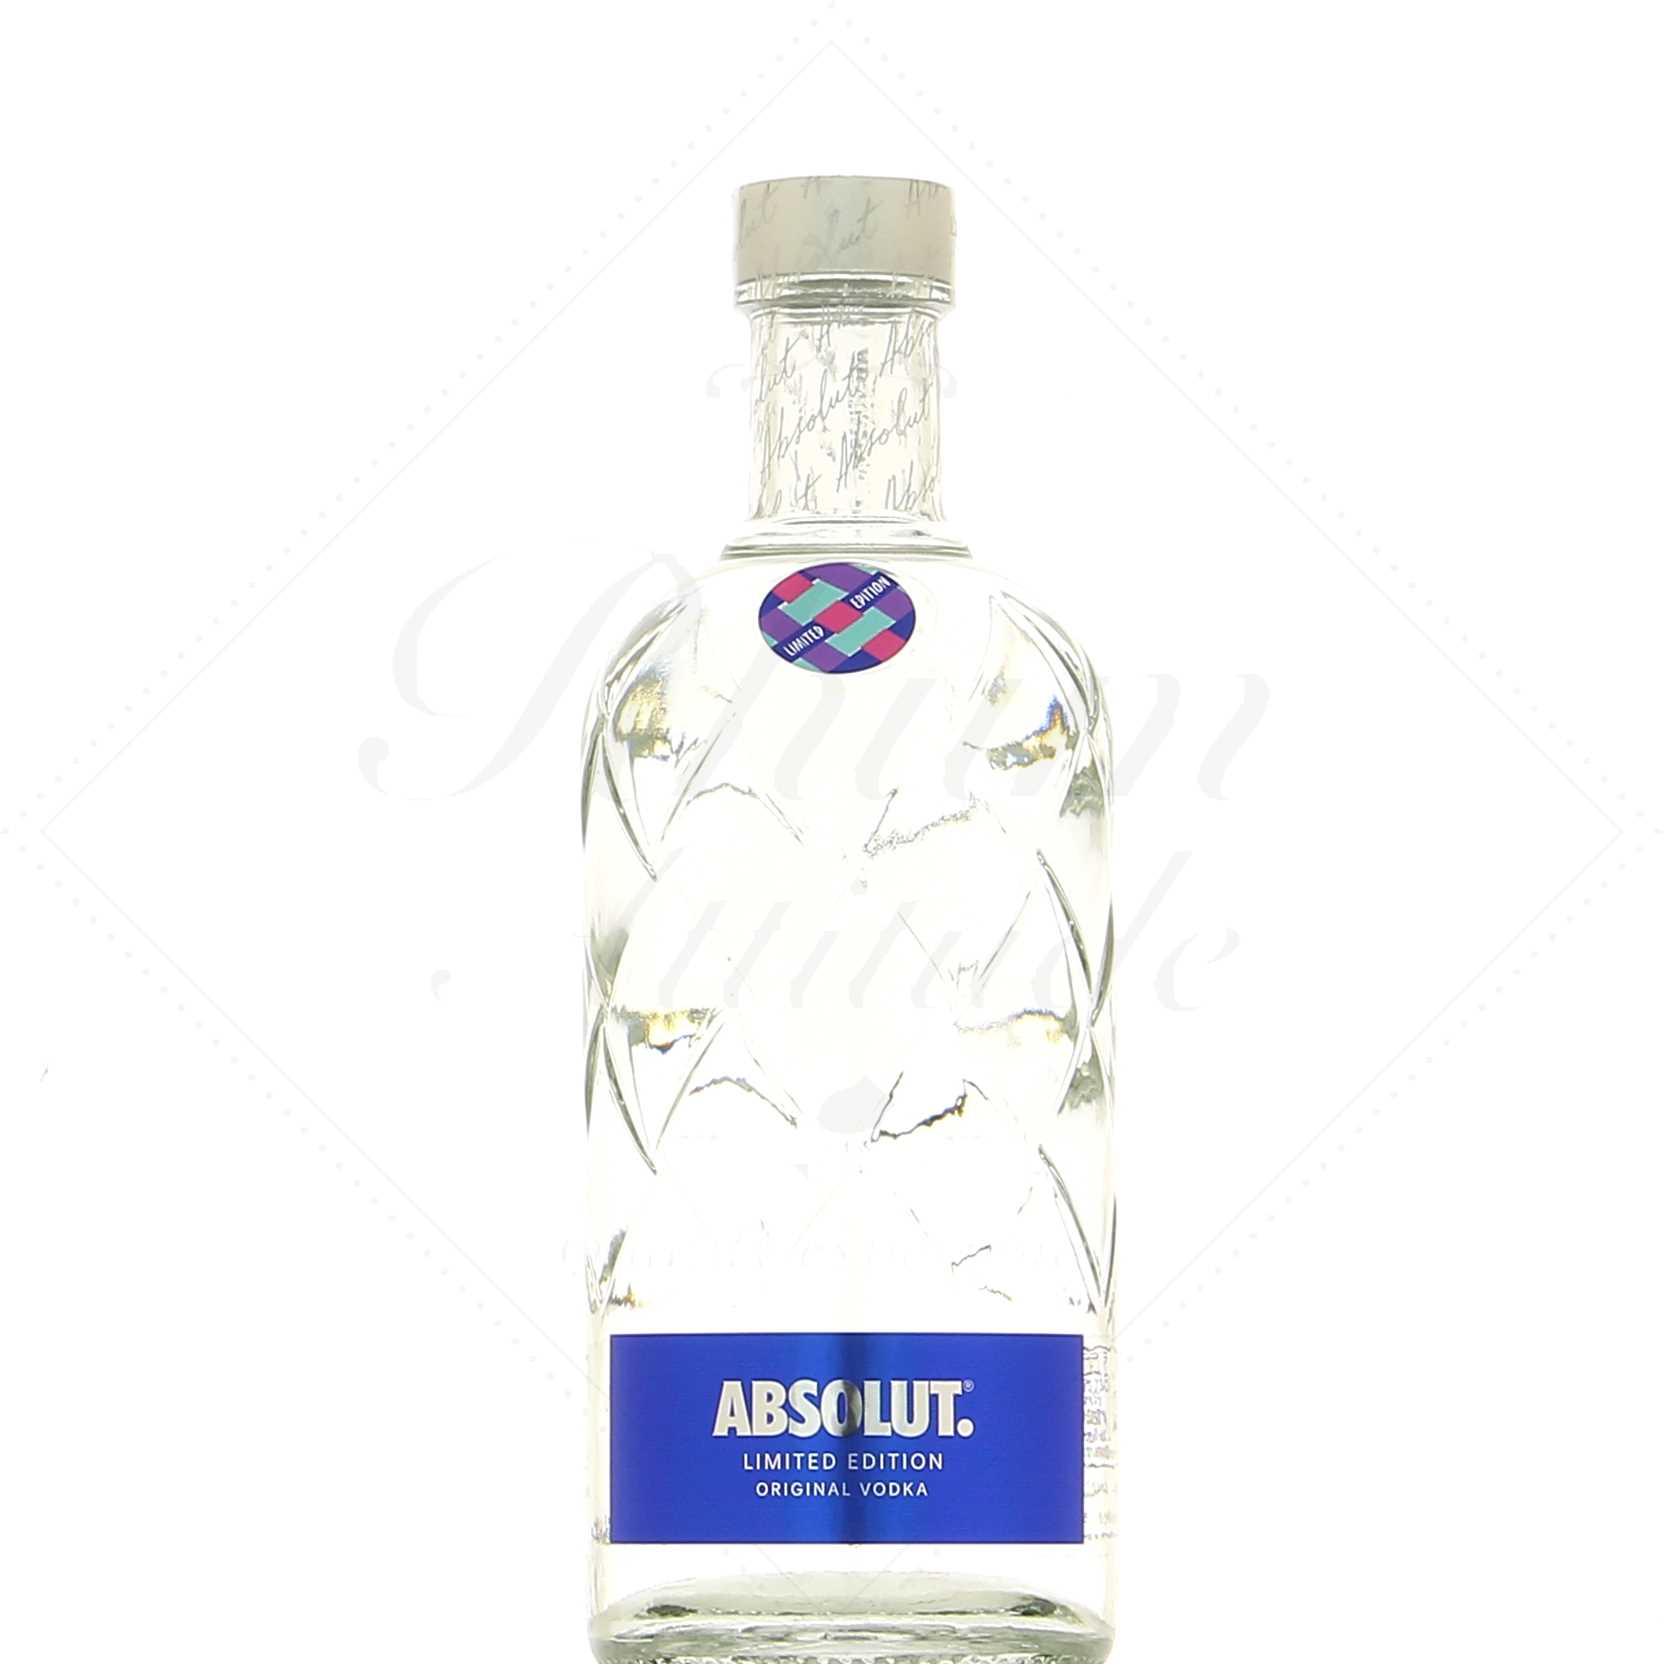 Absolut Vodka Woven As One 40° Limited Edition